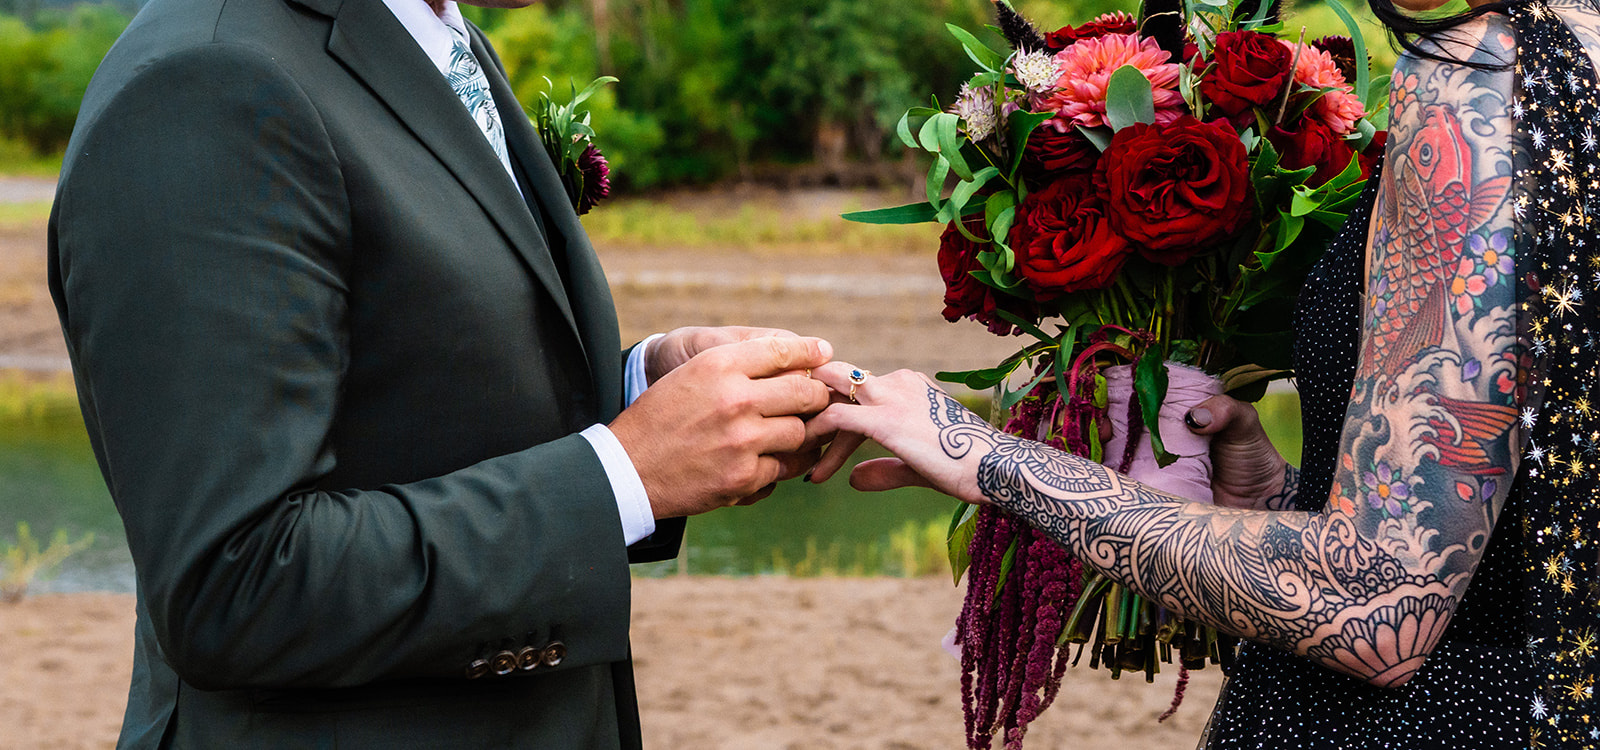 Bride and groom exchanging rings during their celestial themed elopement